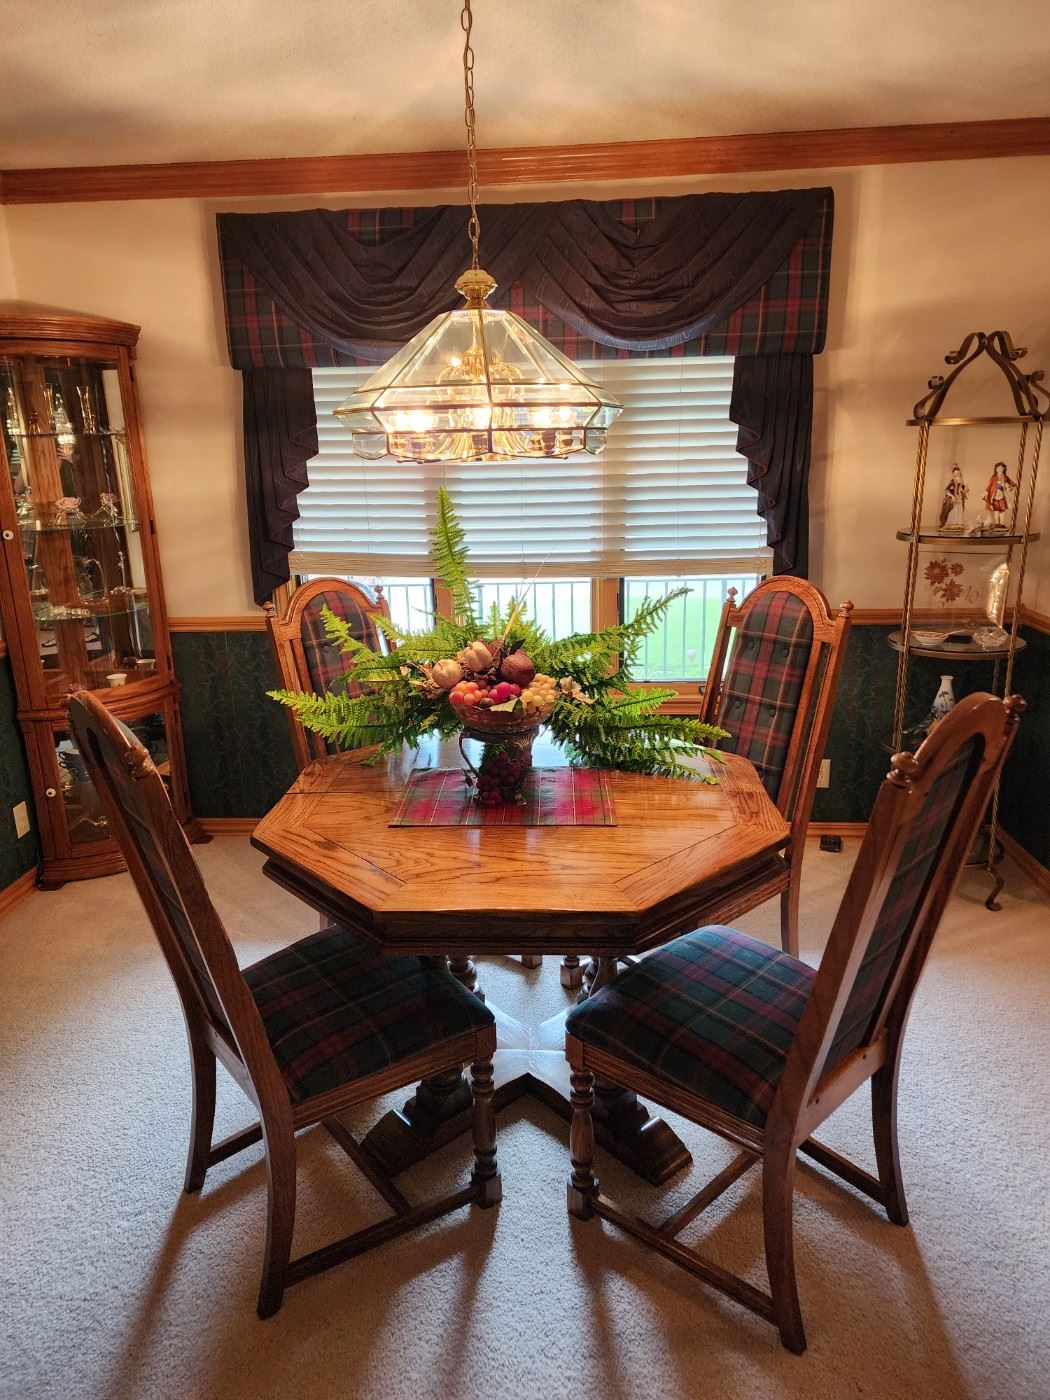 Dining room table 2 leaves and 4 wooden and plaid chairs